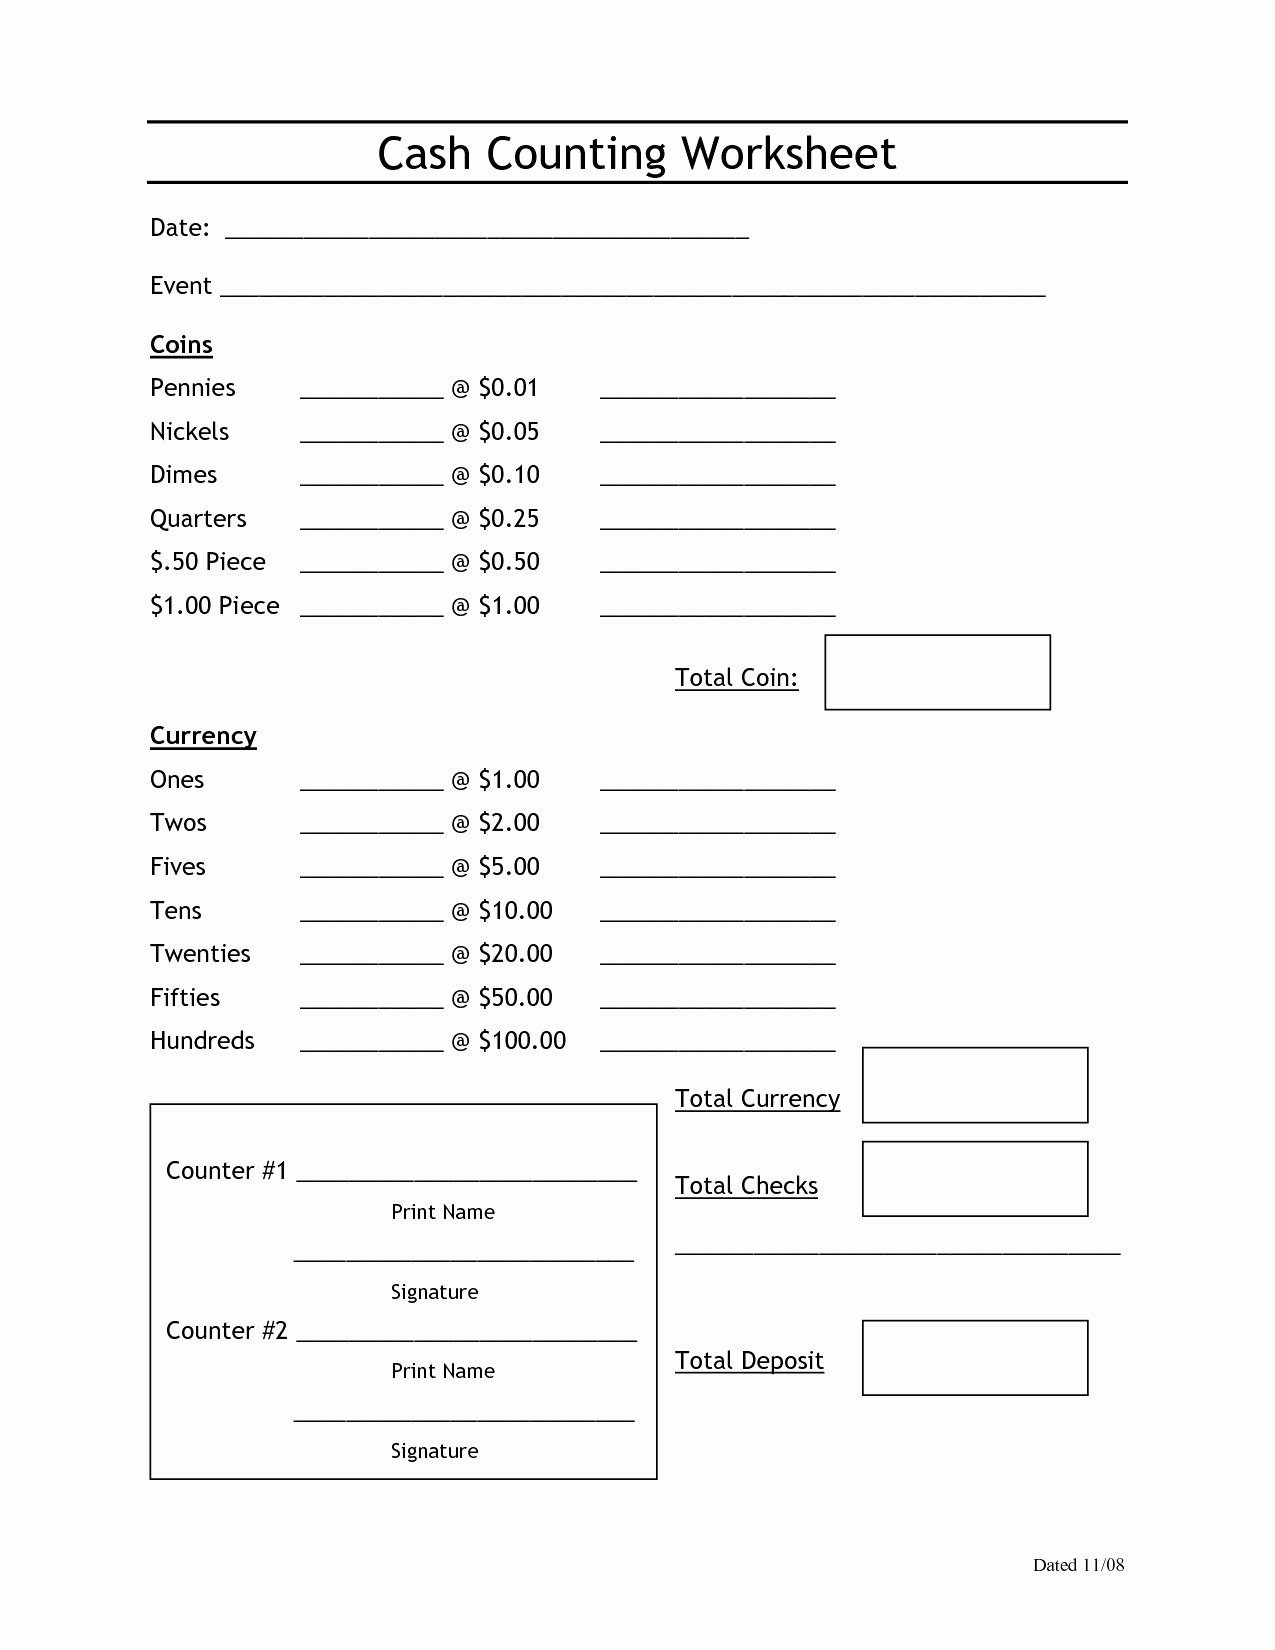 Free Church forms Printable Elegant Church Fering Counting form